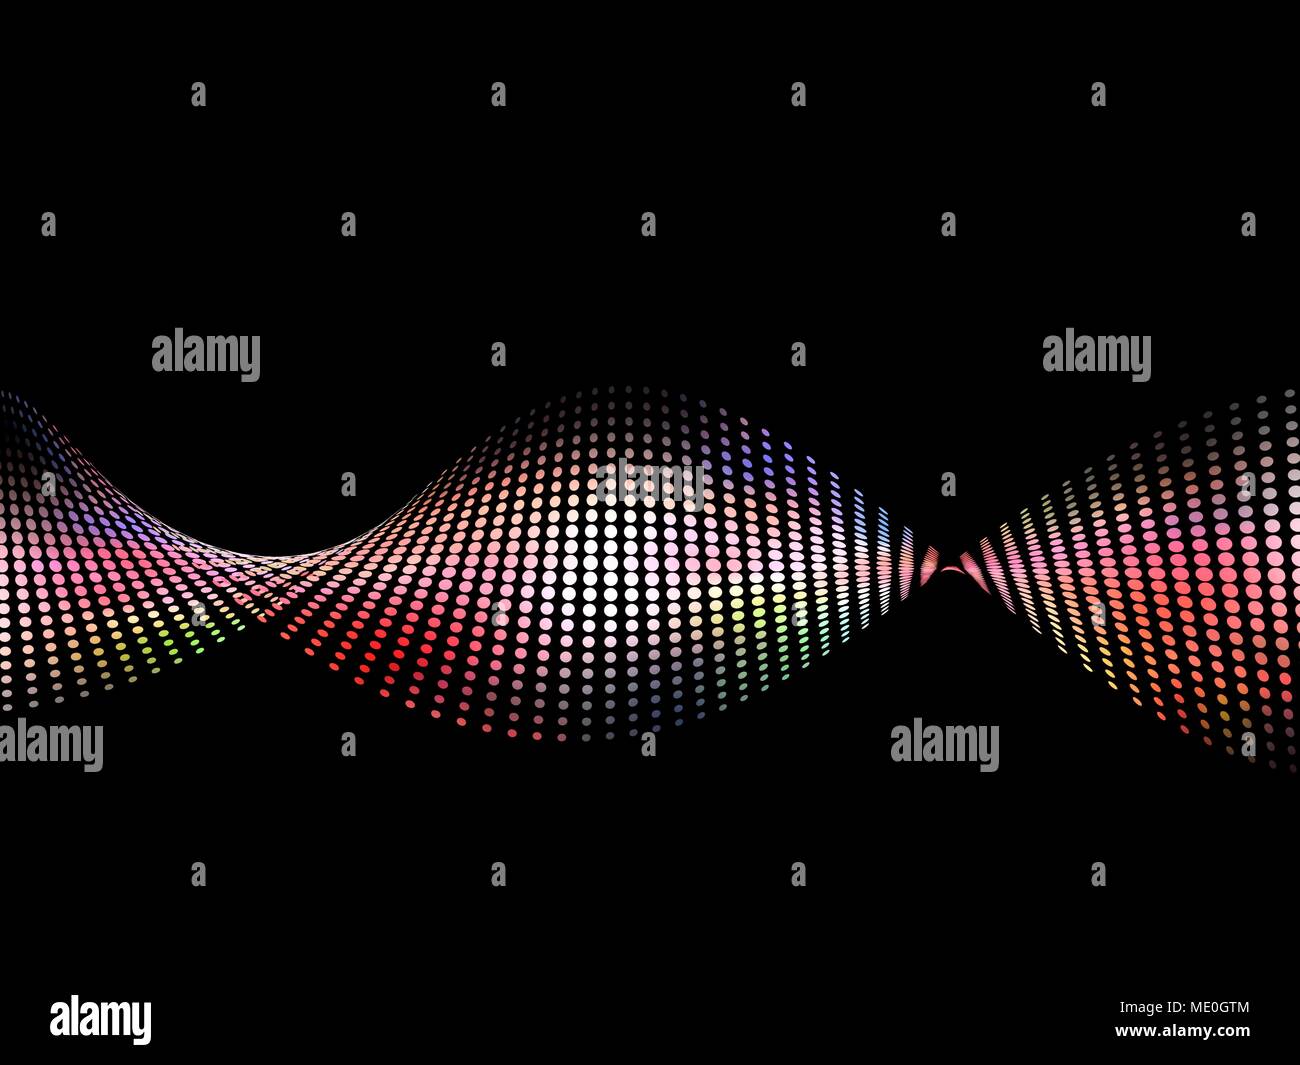 Abstract wave made of coloured dots, illustration. Stock Photo